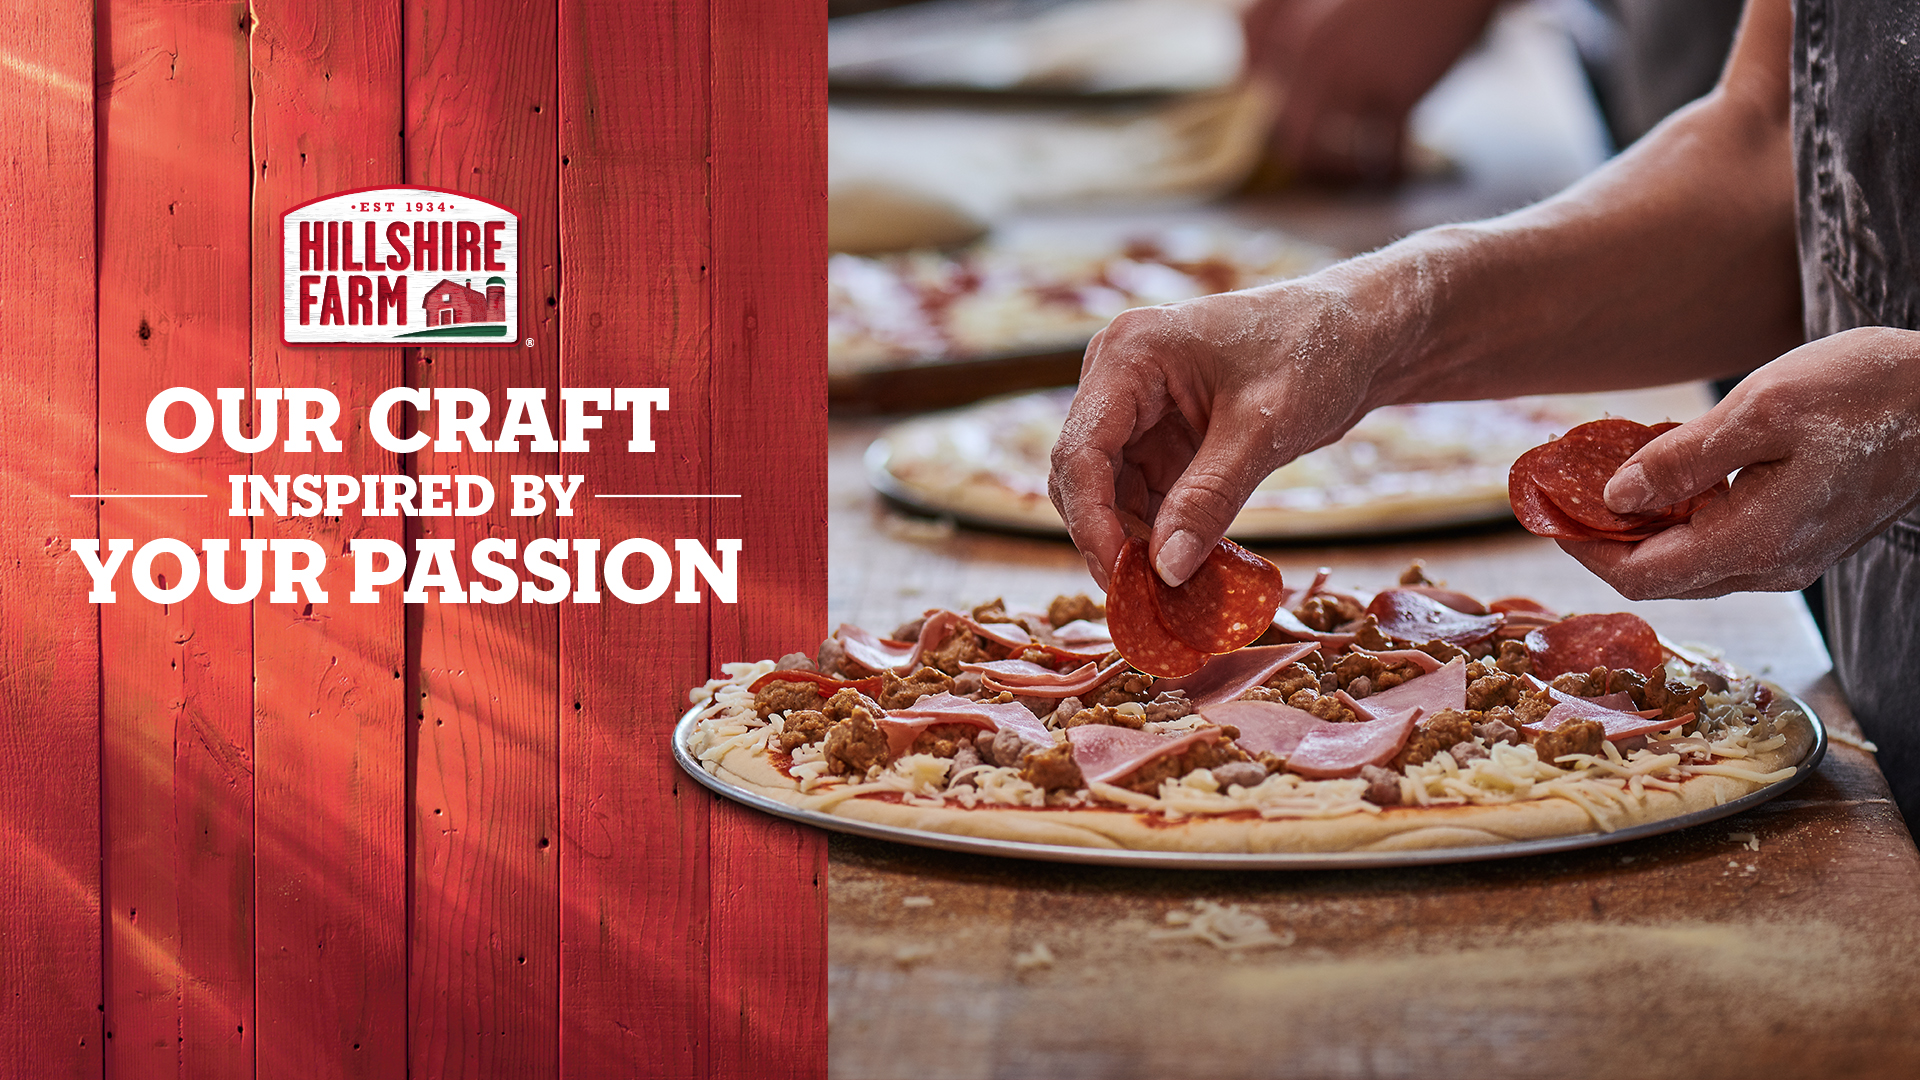 Our Craft Inspired by Your Passion Hillshire Farms Pizza Toppings